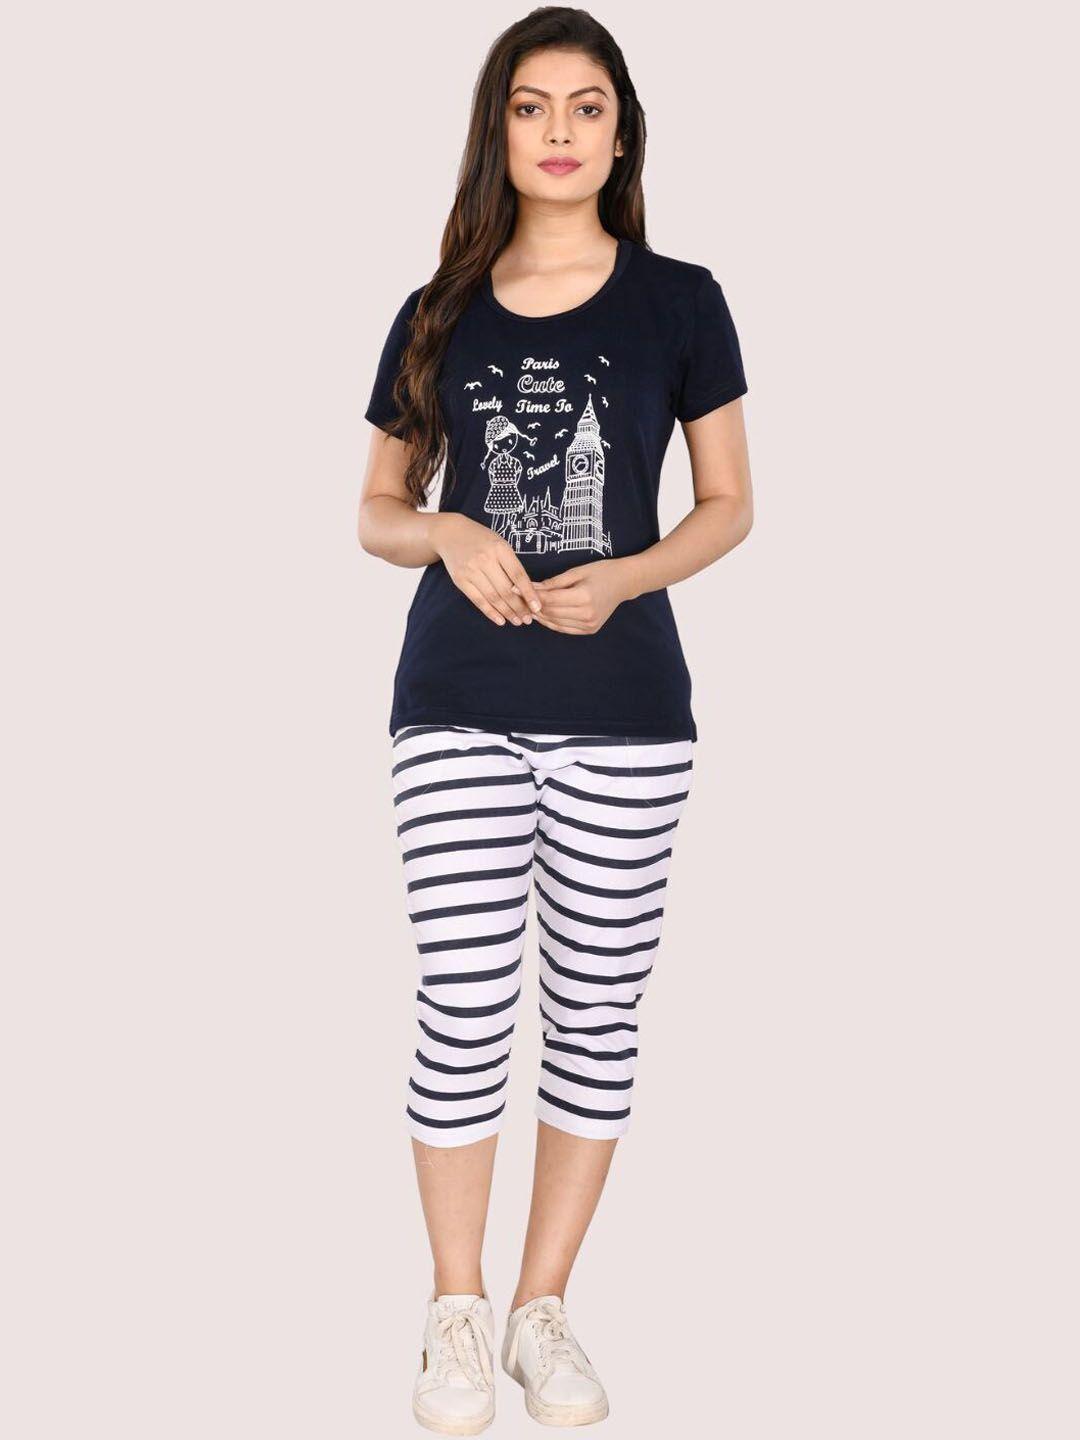 styleaone printed cotton t-shirt & capris set